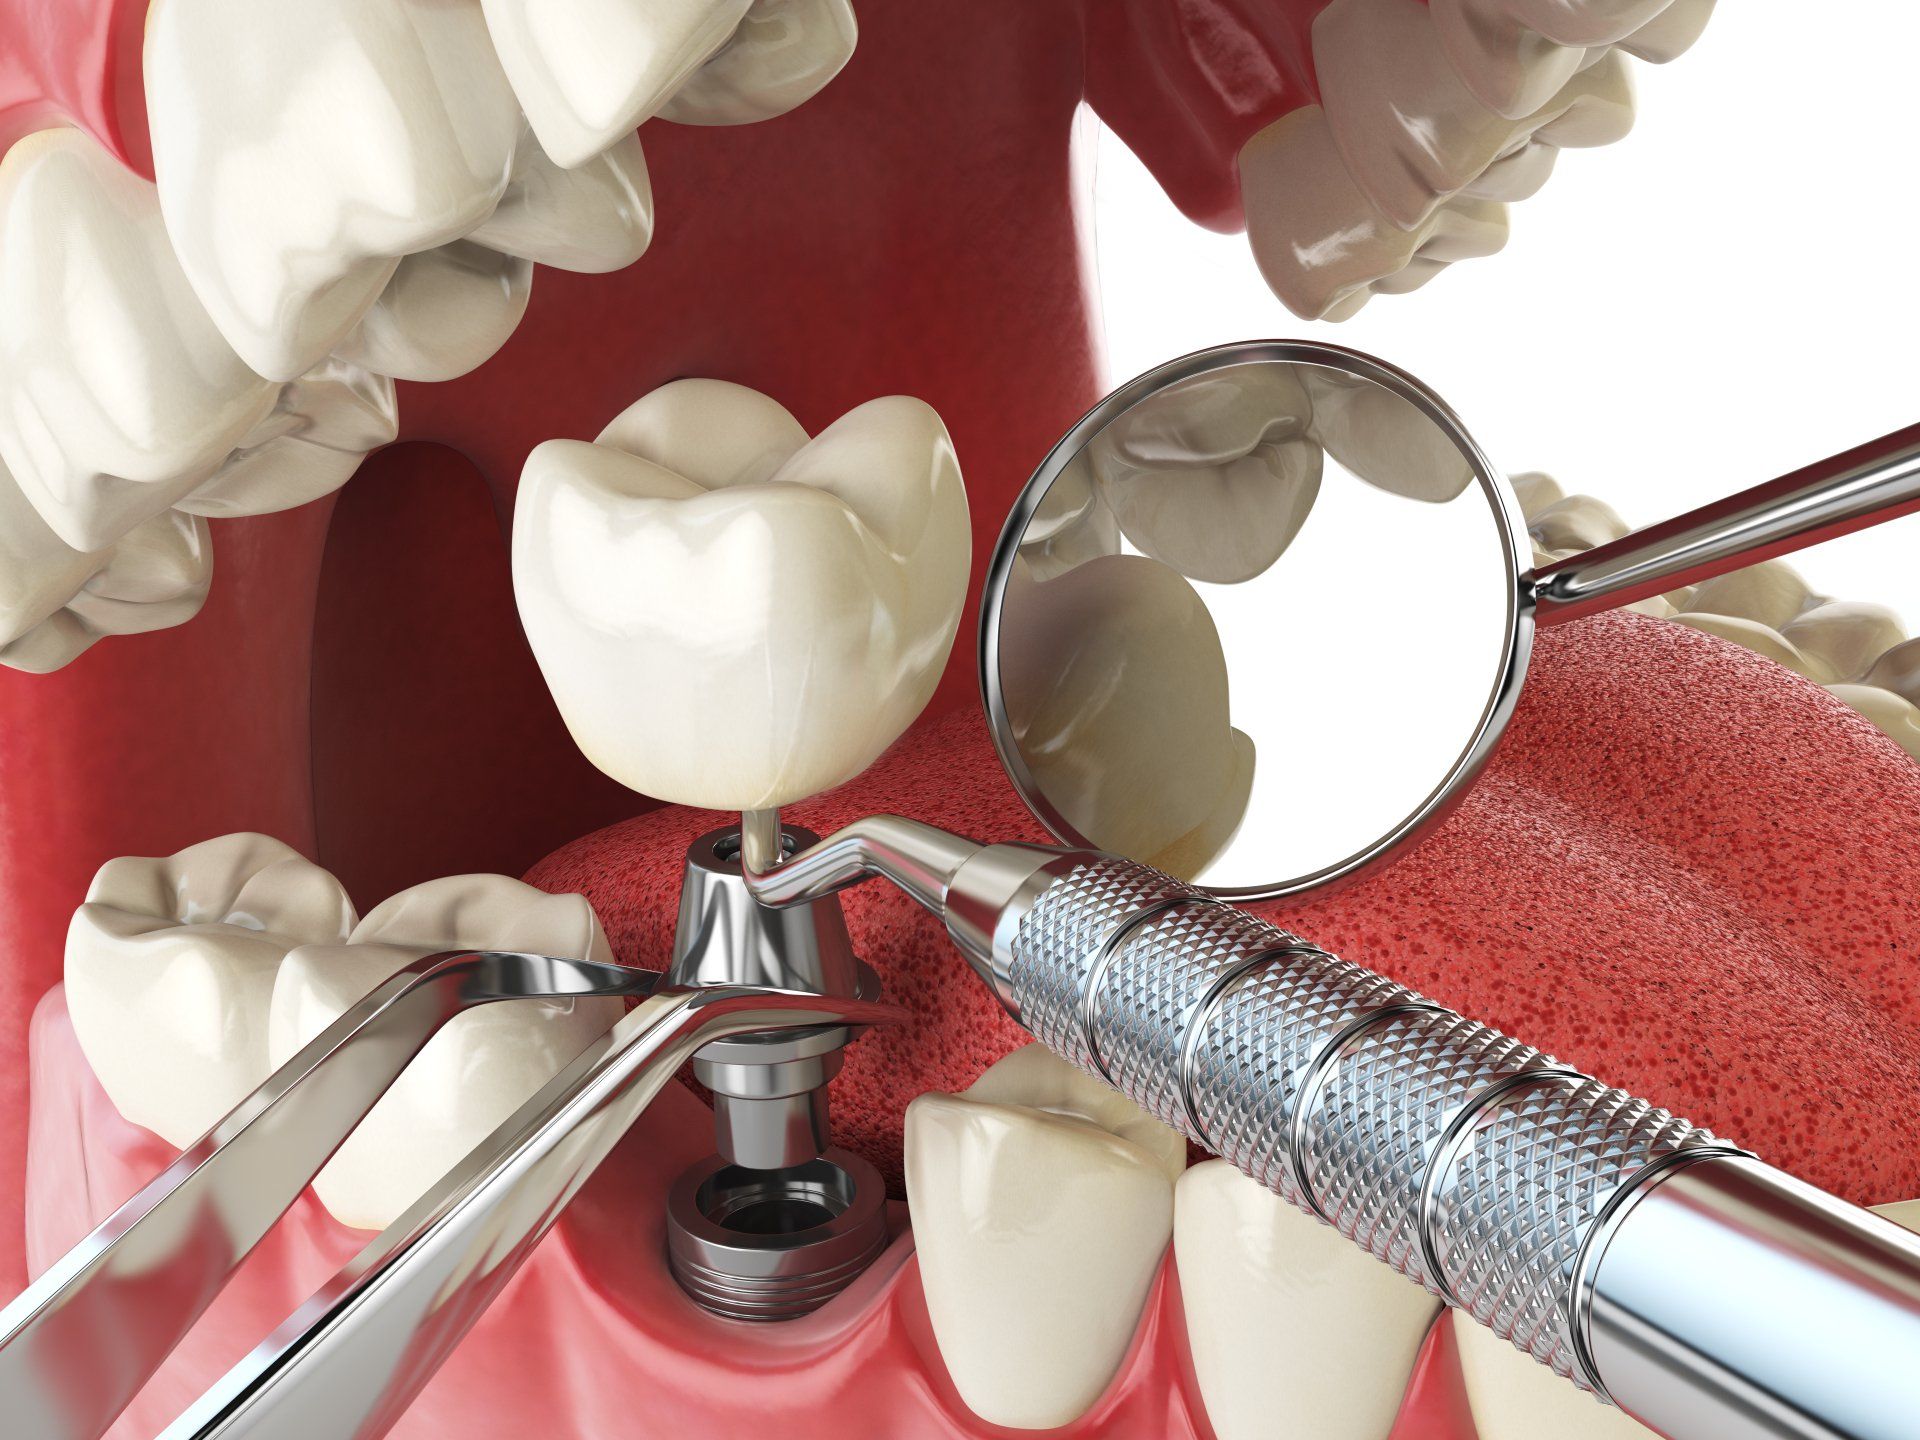 model of dental implant with a crown on top